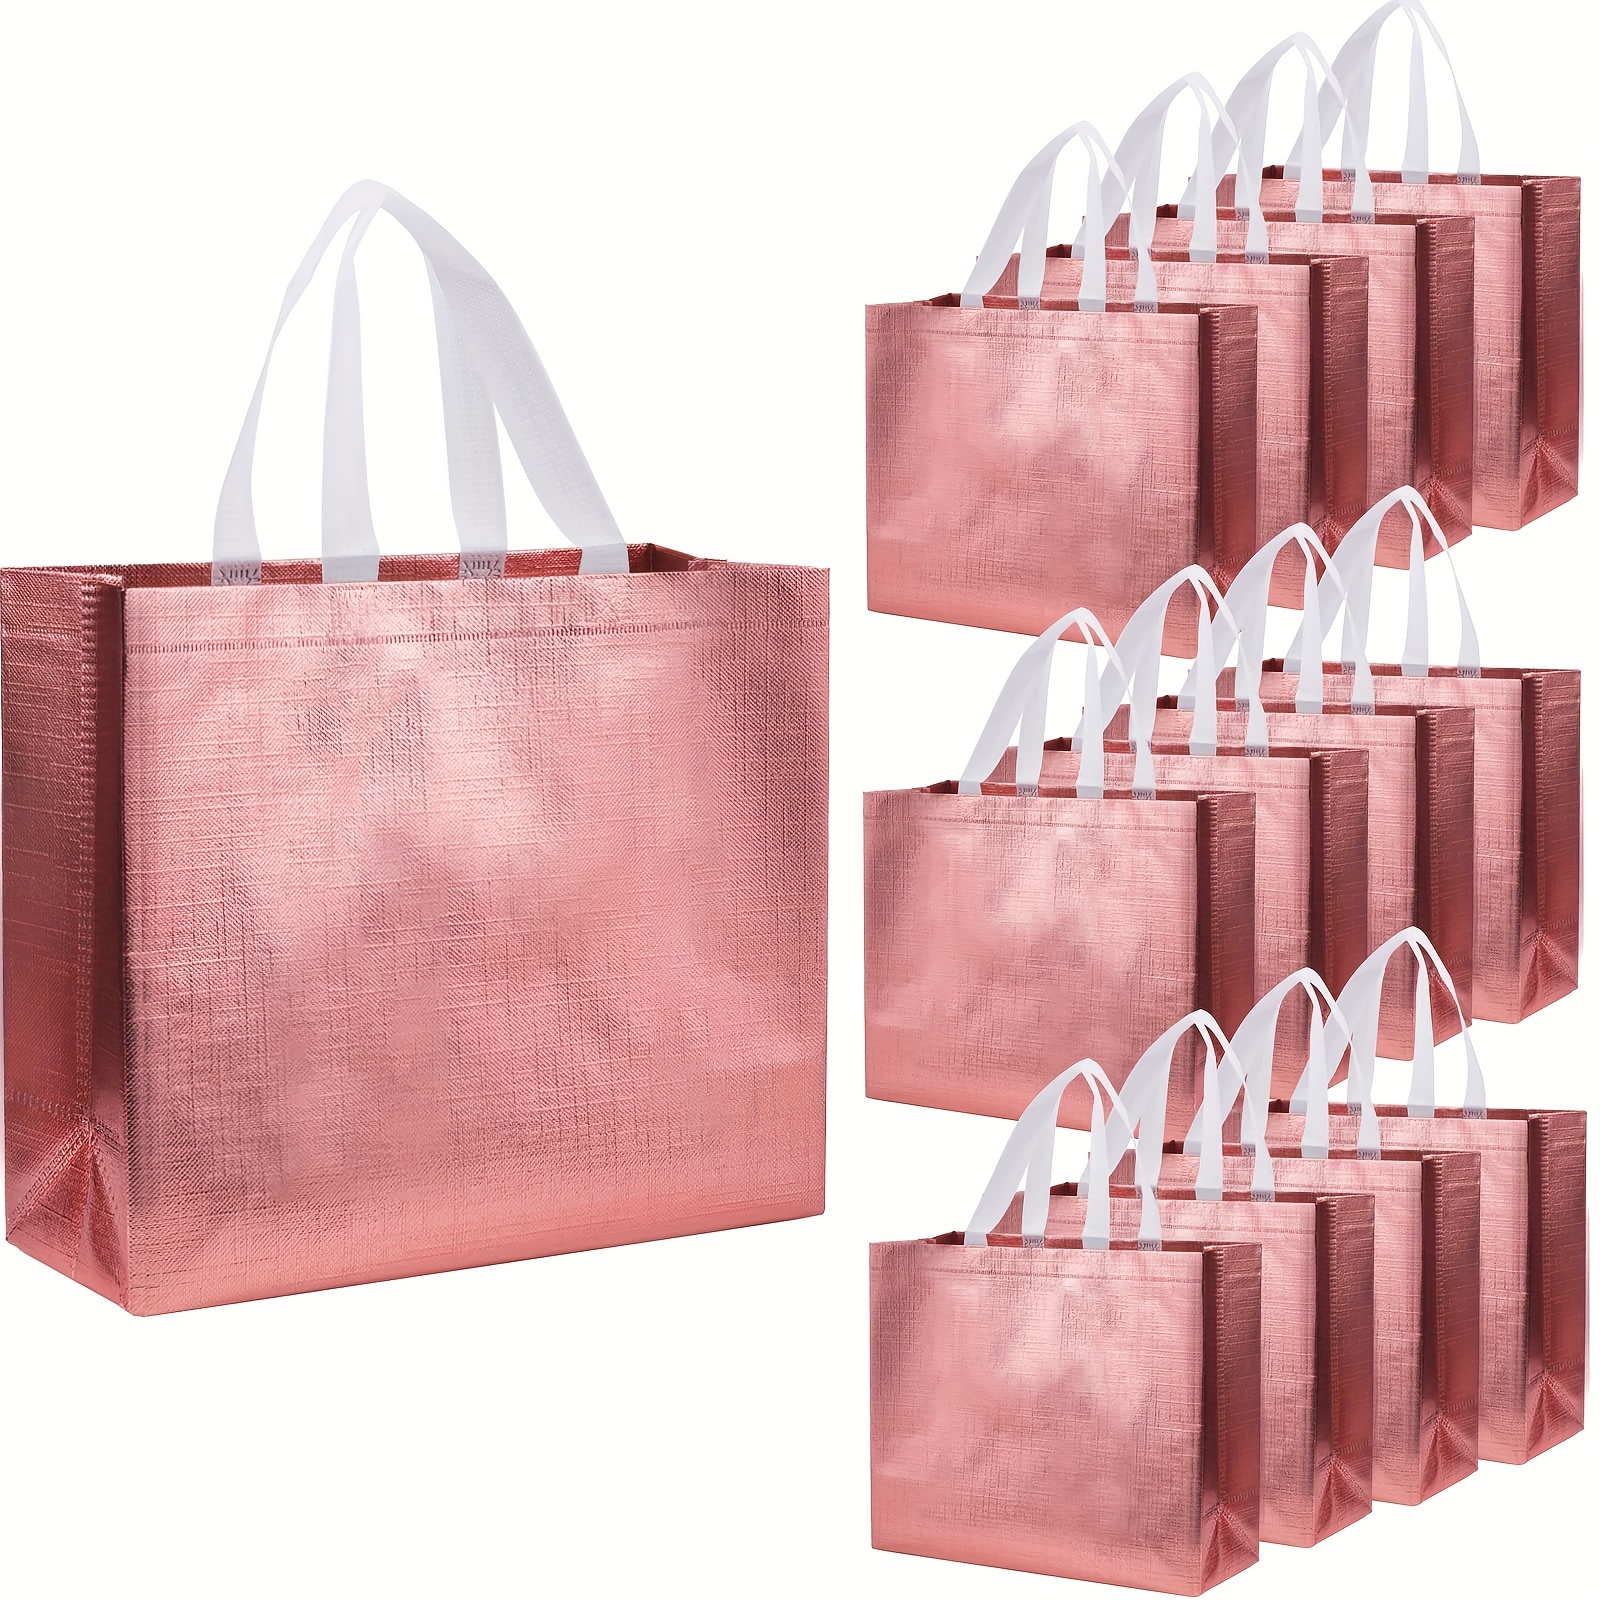 20Pcs/Lot Silver Color Shining Gift Bags Plastic Tote Bag for Packing 2  Sizes Shopping Bags Party Favor Bags with Handles - AliExpress